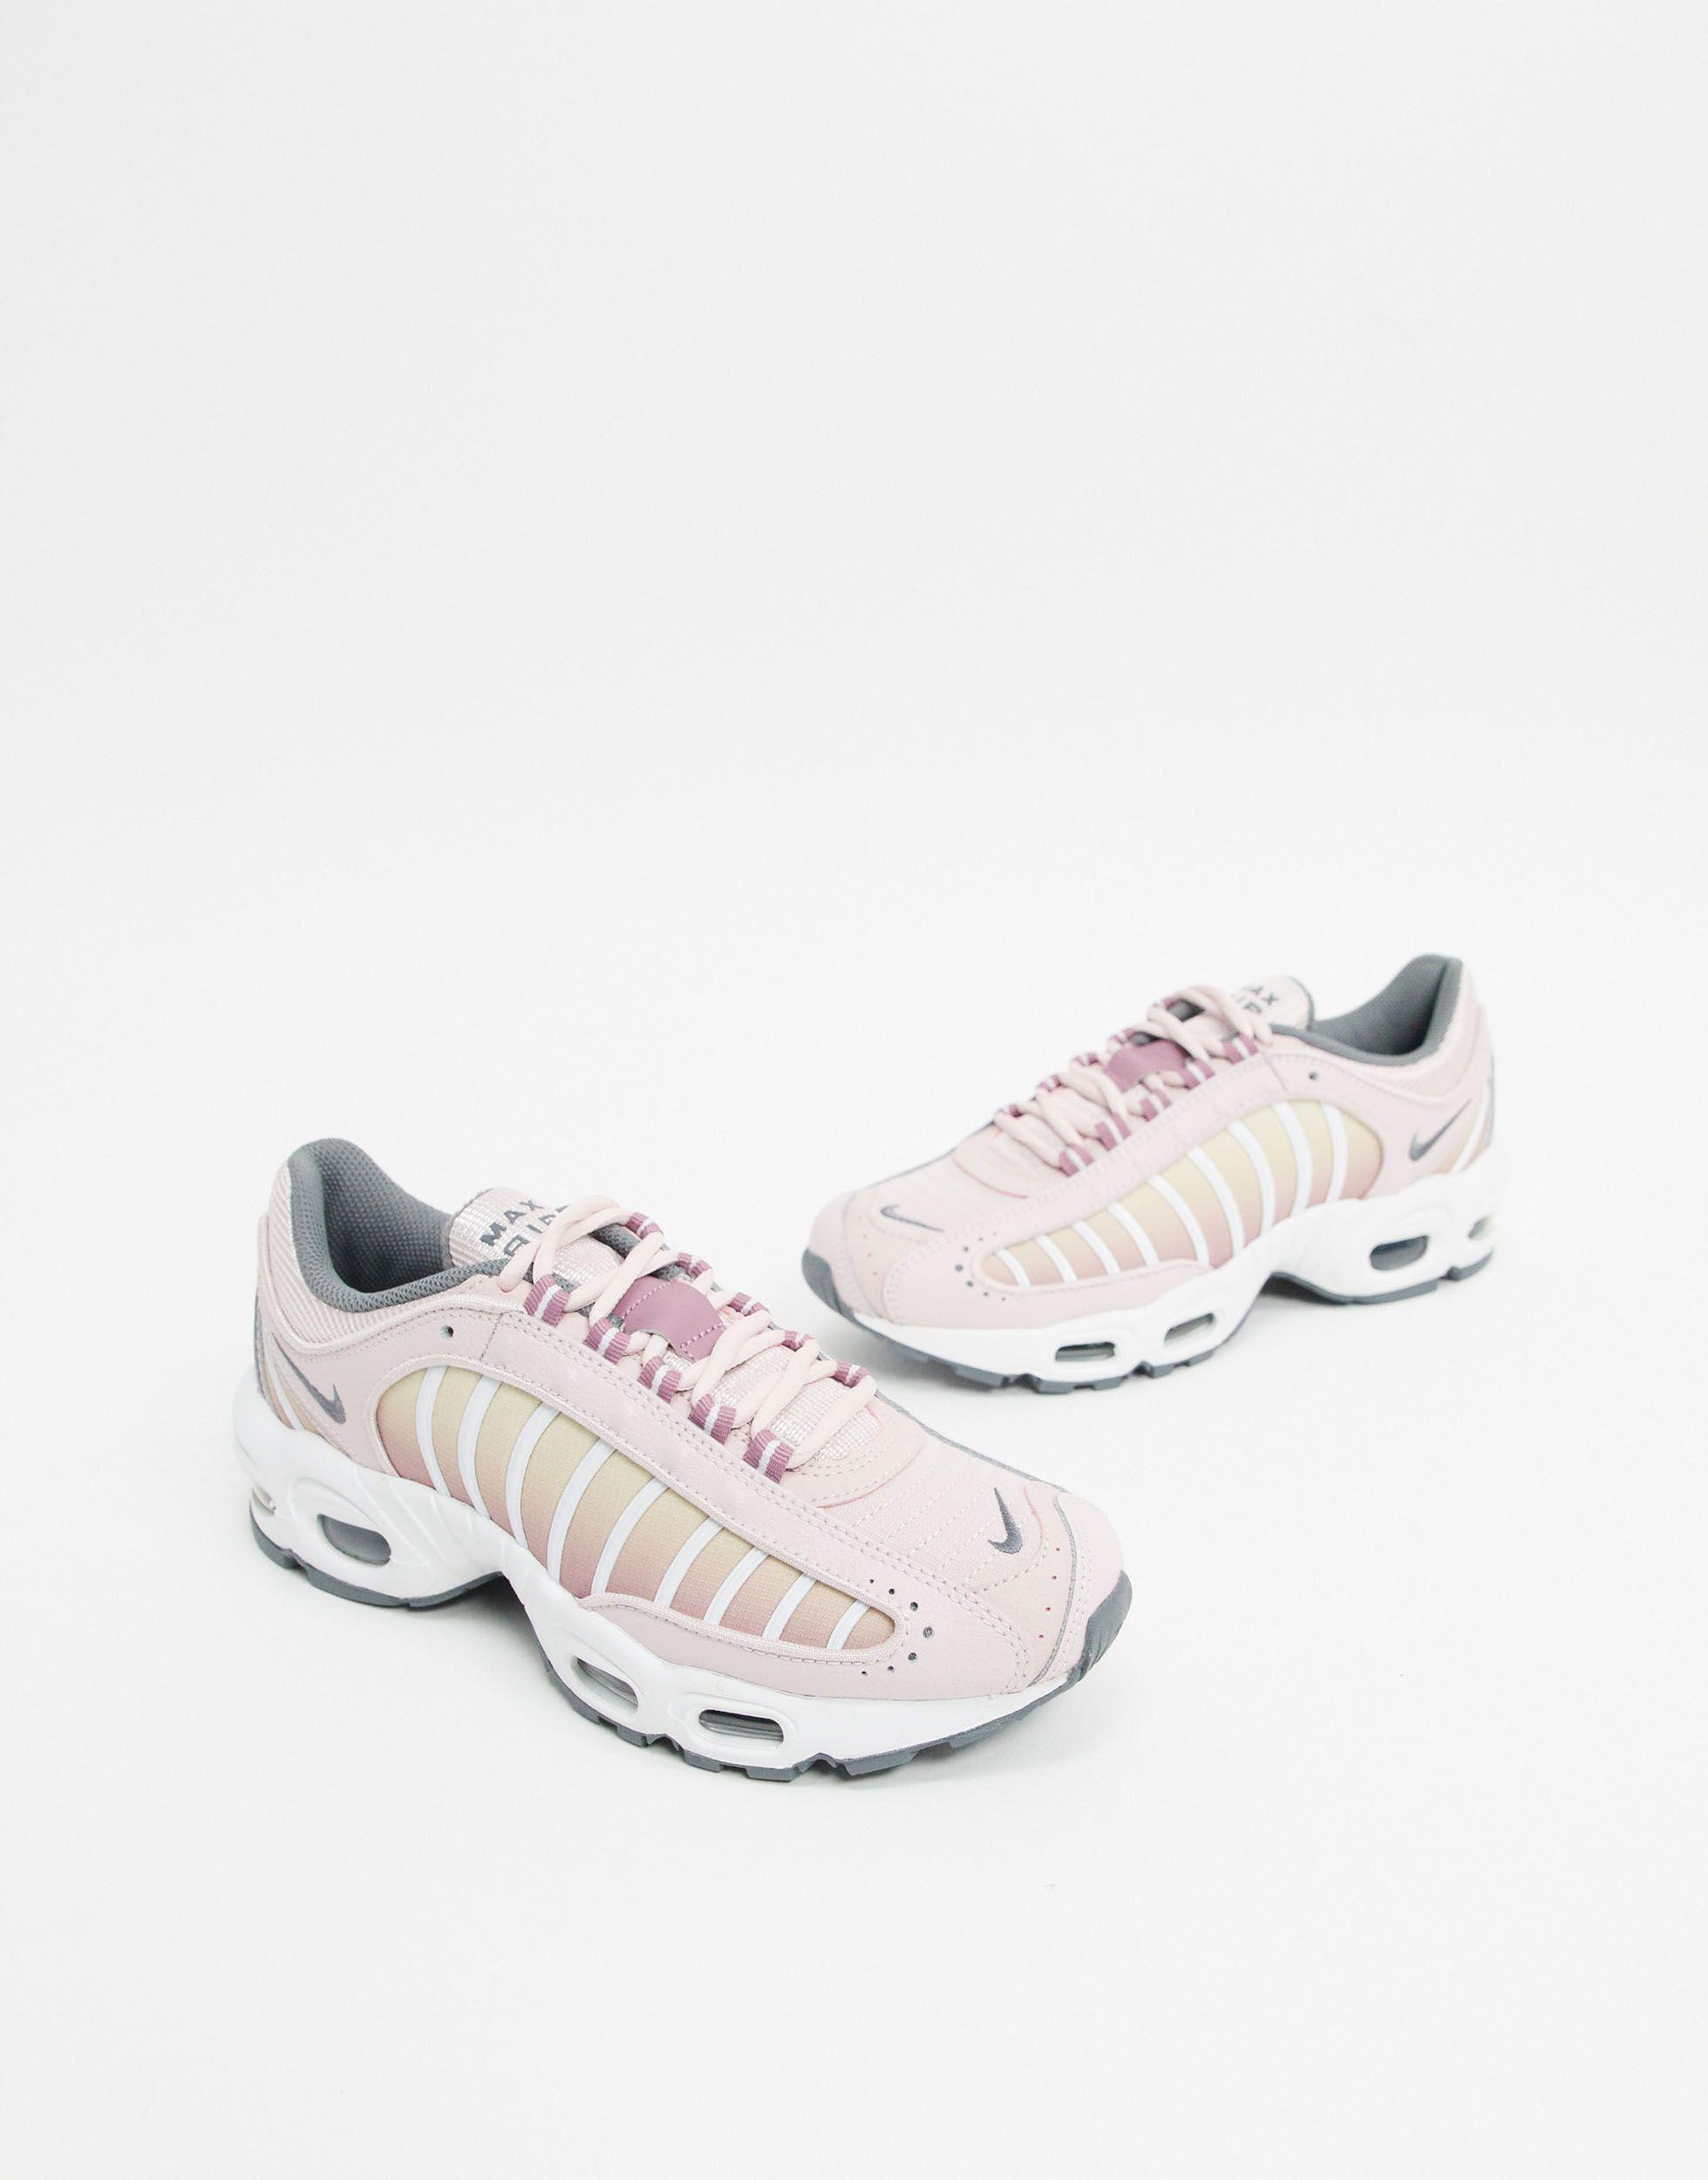 Nike Lace Air Max Tailwind Iv Shoe in 